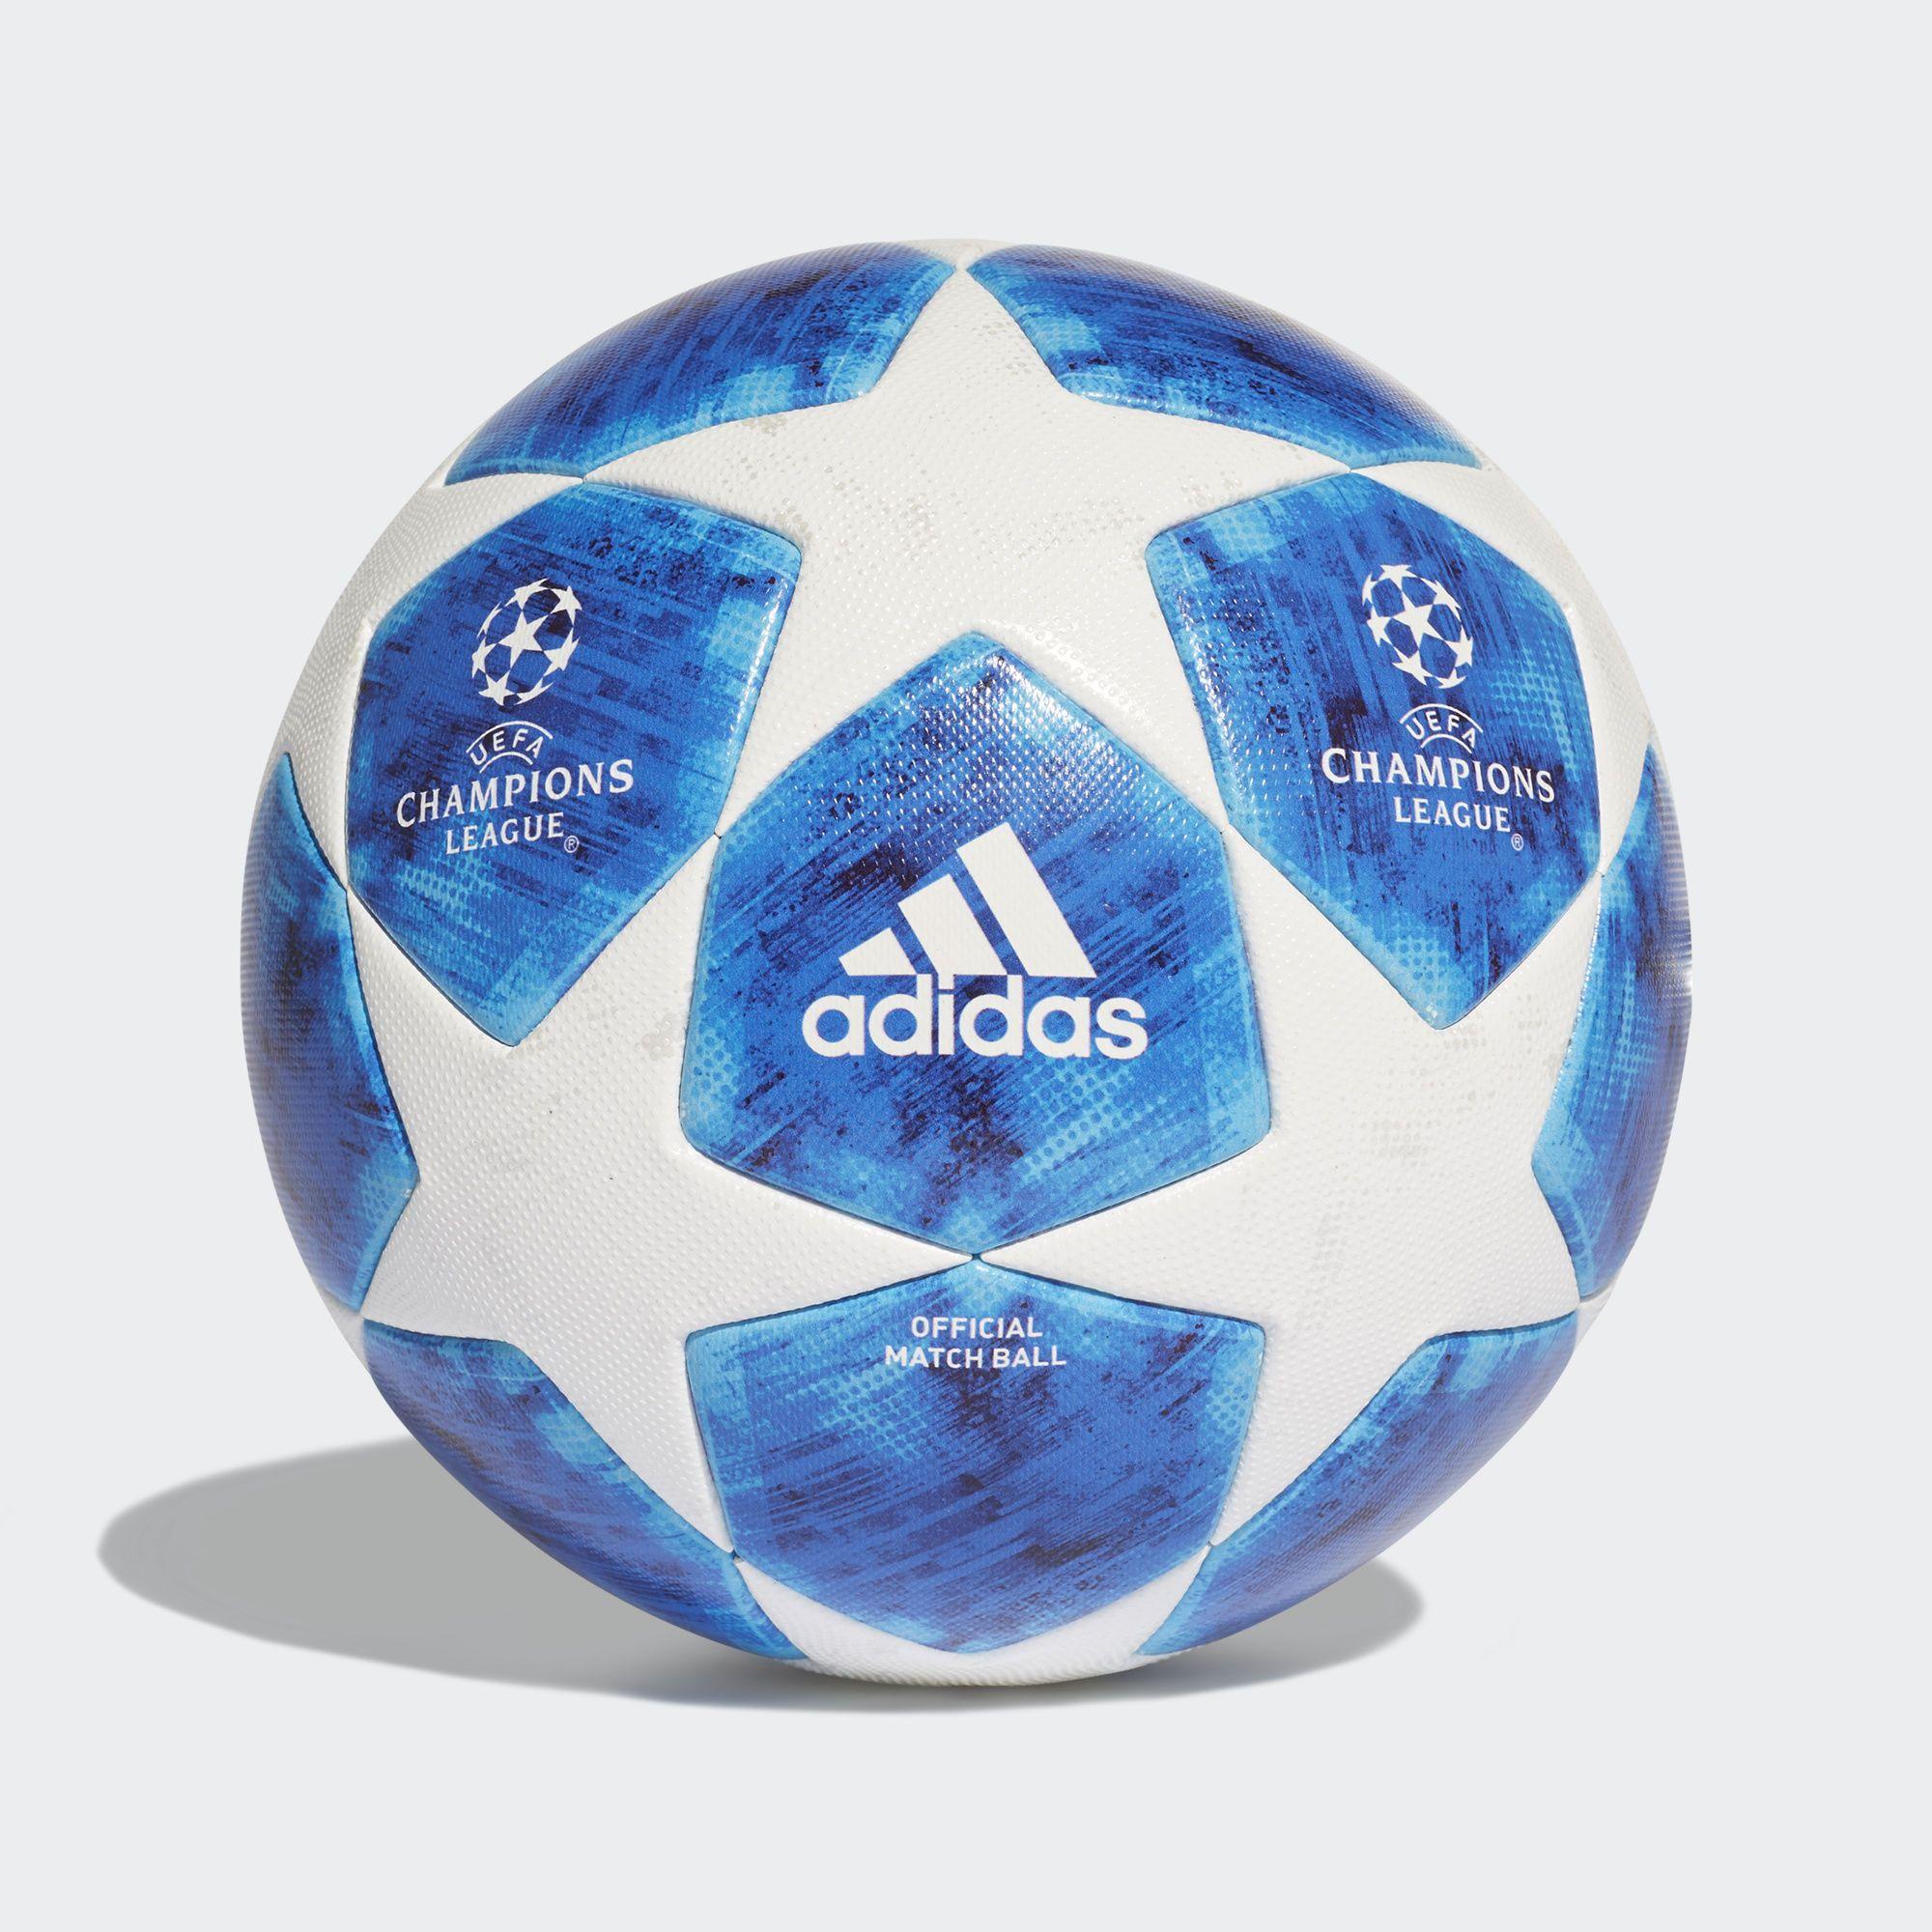 Blue and White Football Logo - adidas Finale 18 Official Match Ball - White | adidas Regional